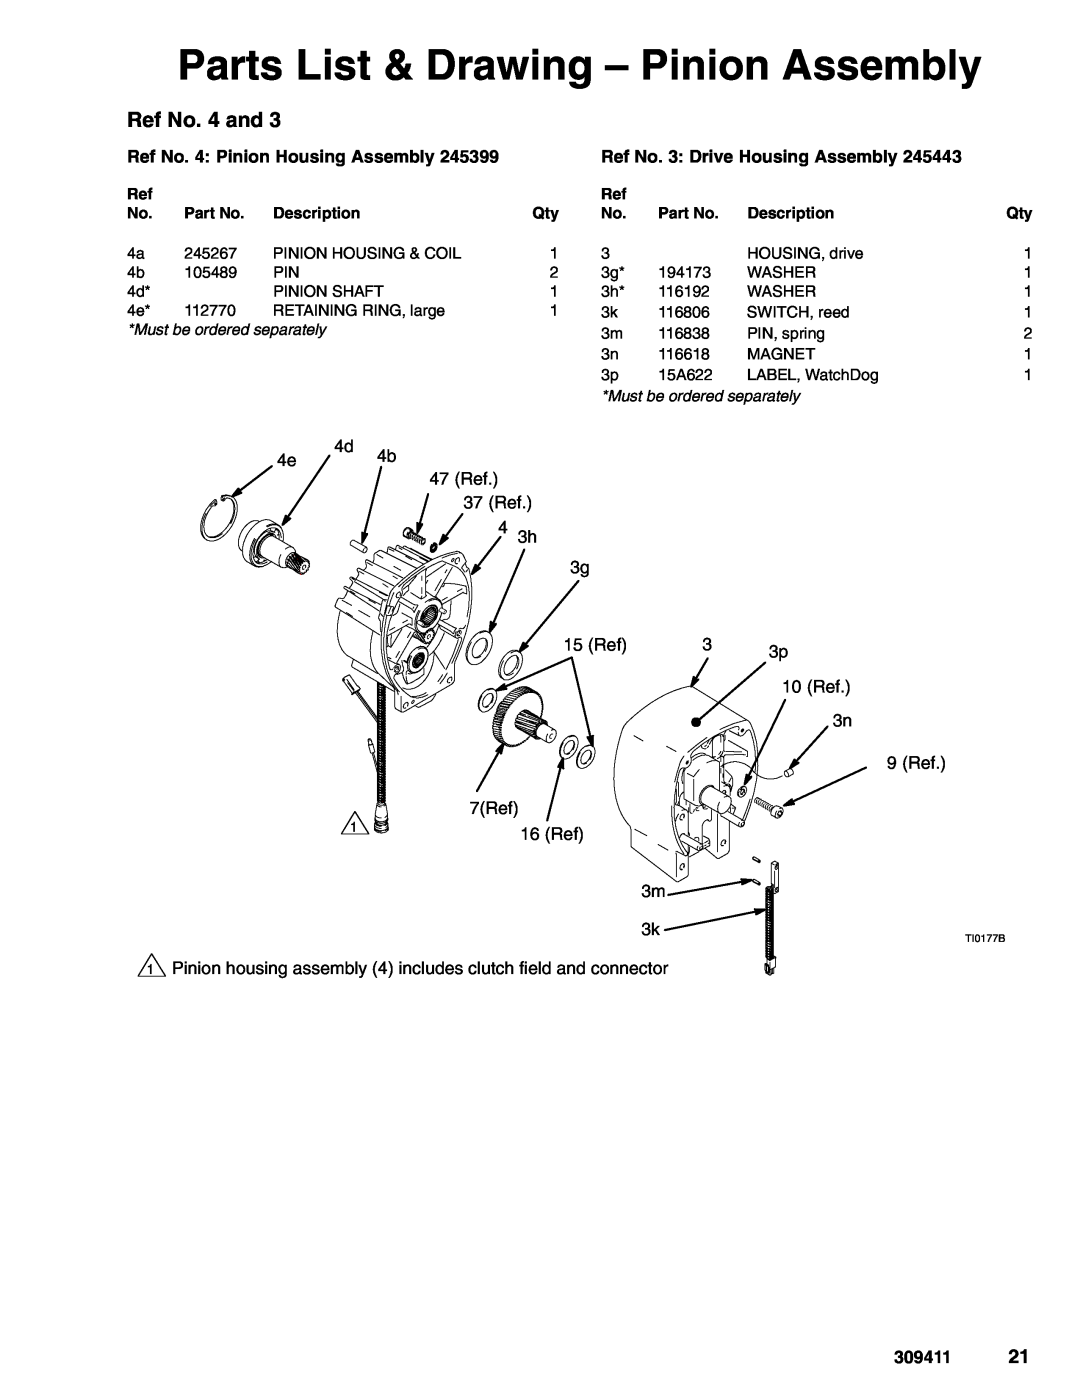 Graco 233710 Parts List & Drawing - Pinion Assembly, Ref No. 4 and, Ref No. 4 Pinion Housing Assembly, 309411, Description 